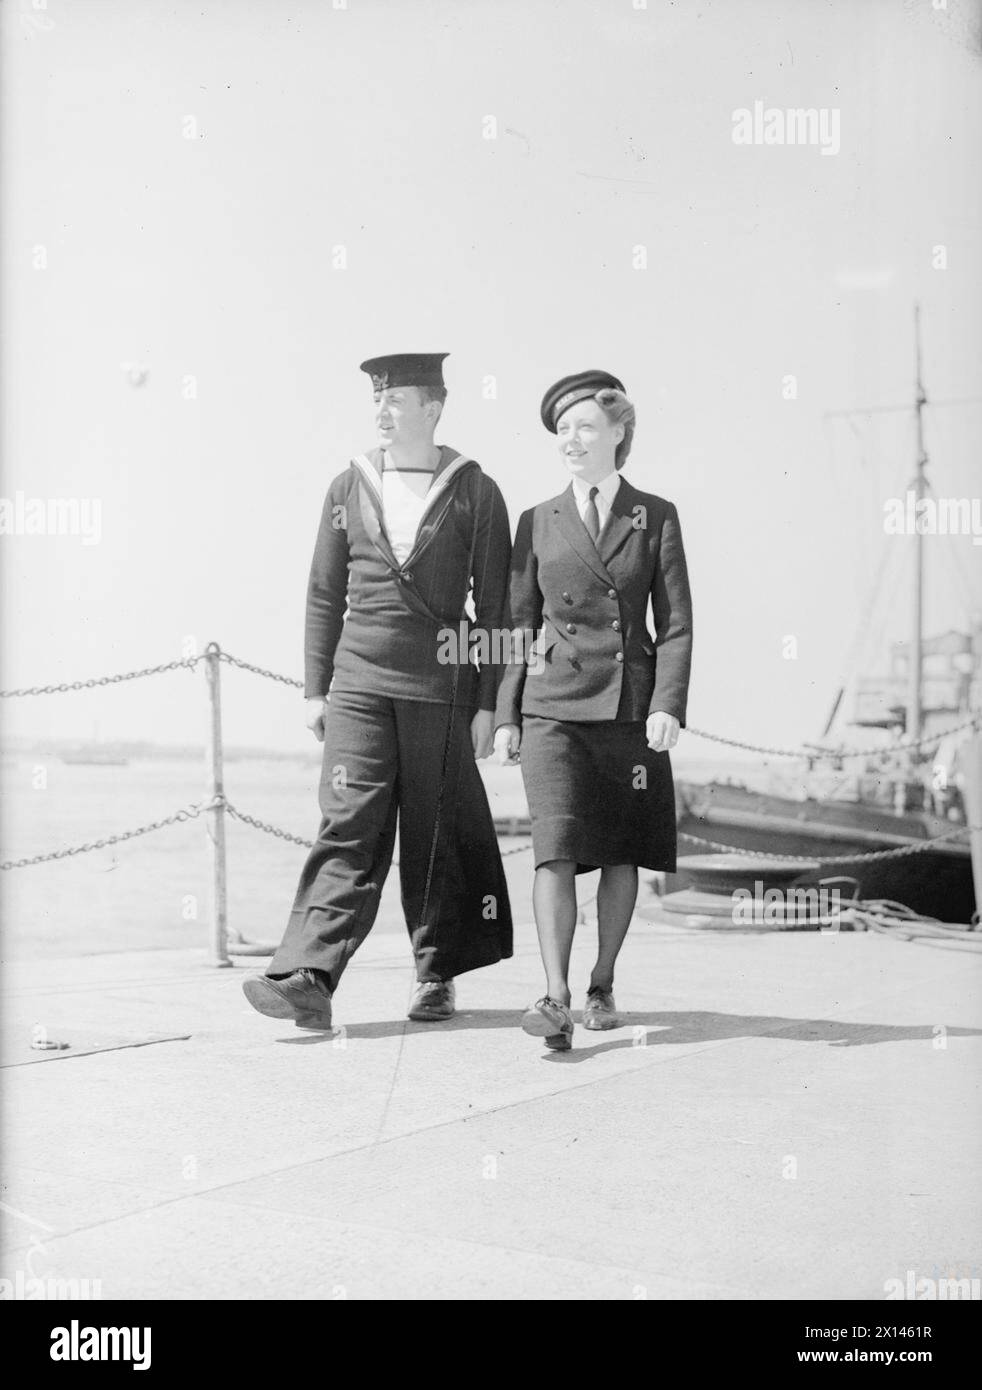 A WREN AND A RATING. 30 JULY 1943, PORTSMOUTH. - A rating of the Senior Service with a Wren rating of the sister service, the WRNS. Uniforms of both services are of navy serge Stock Photo